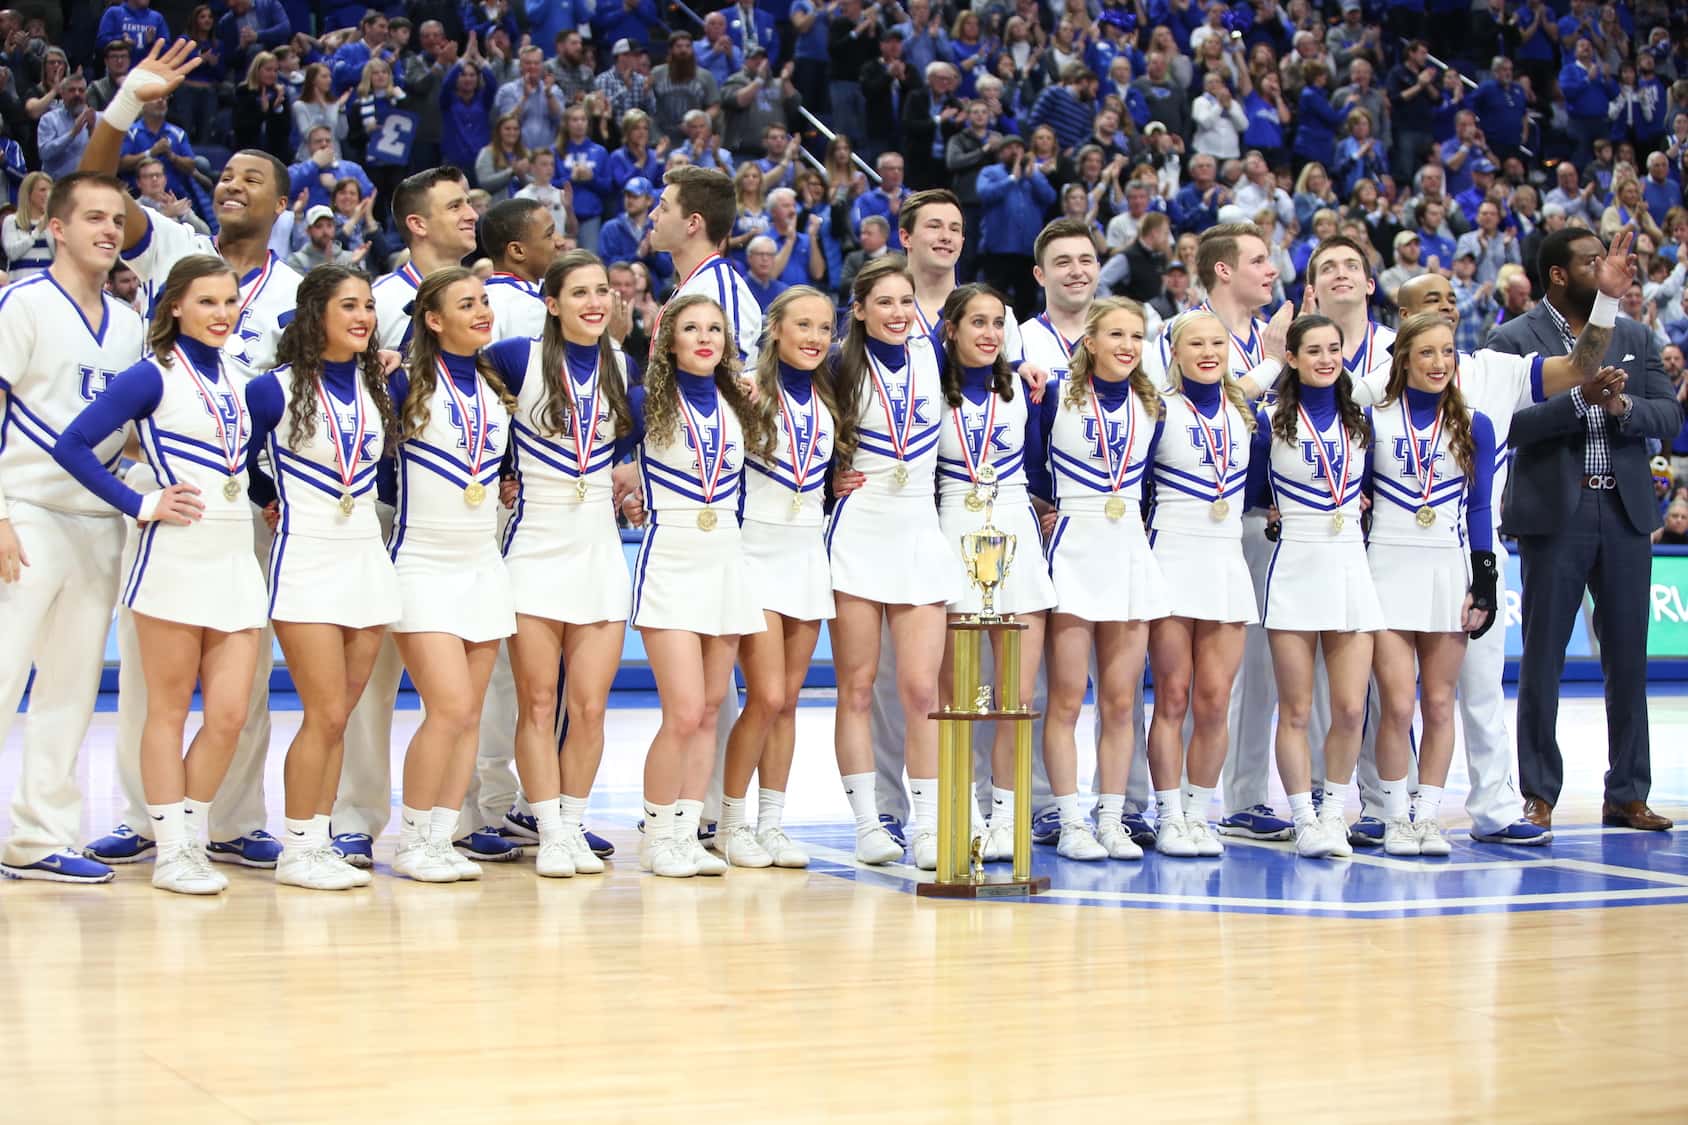 PHOTOS UK Cheerleaders Honored at Rupp Your Sports Edge 2021